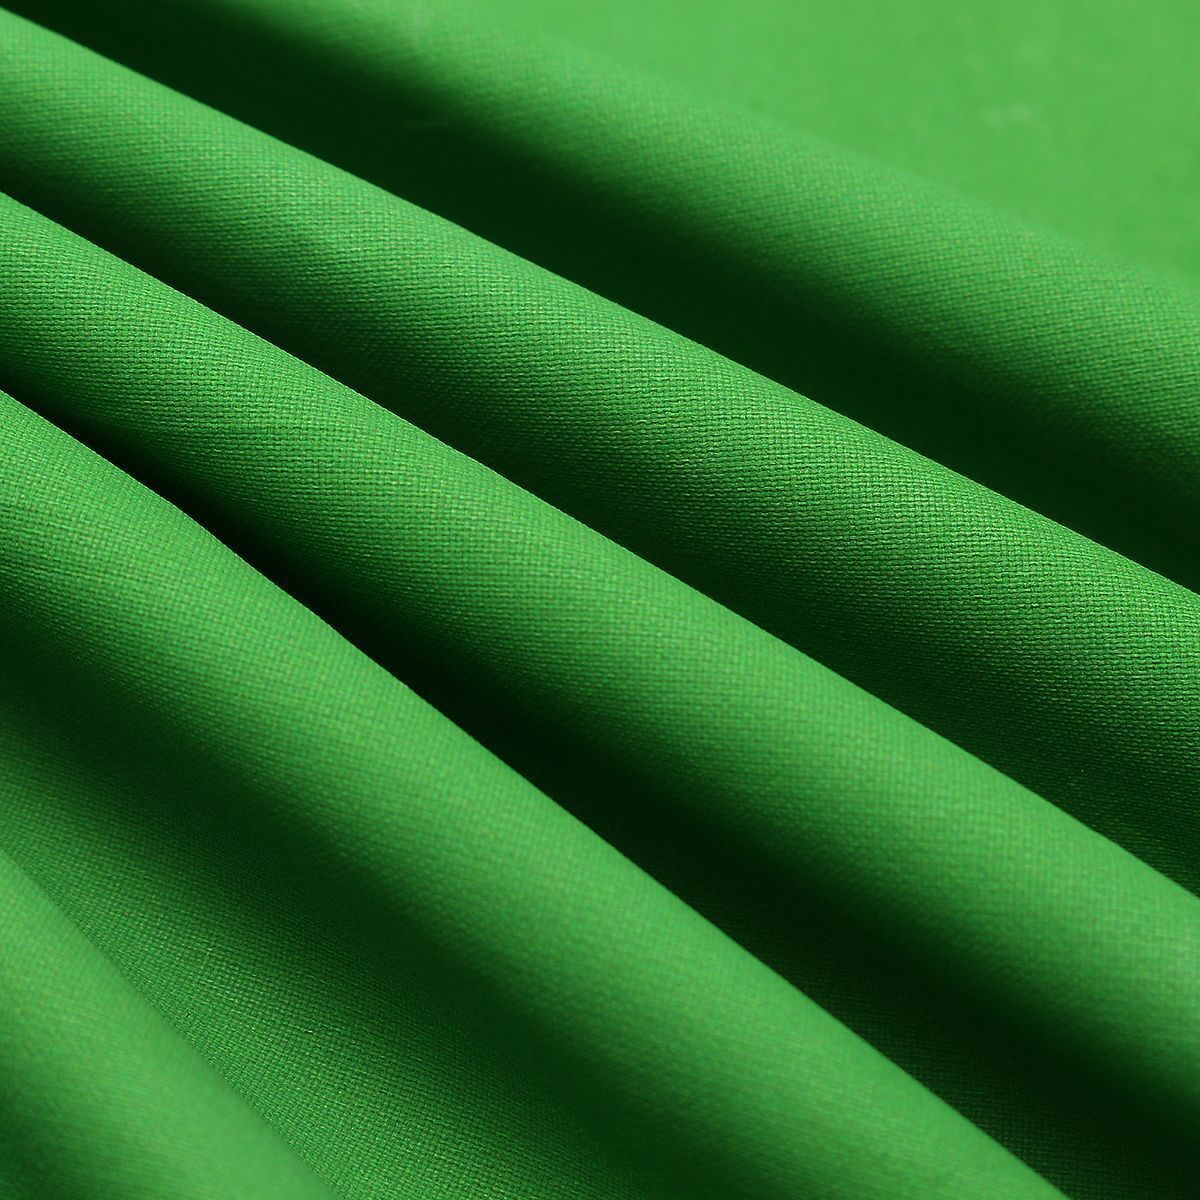 7X5FT-Chromakey-Green-Photo-Photography-Backdrop-Background-Canvas-Studio-Props-1144488